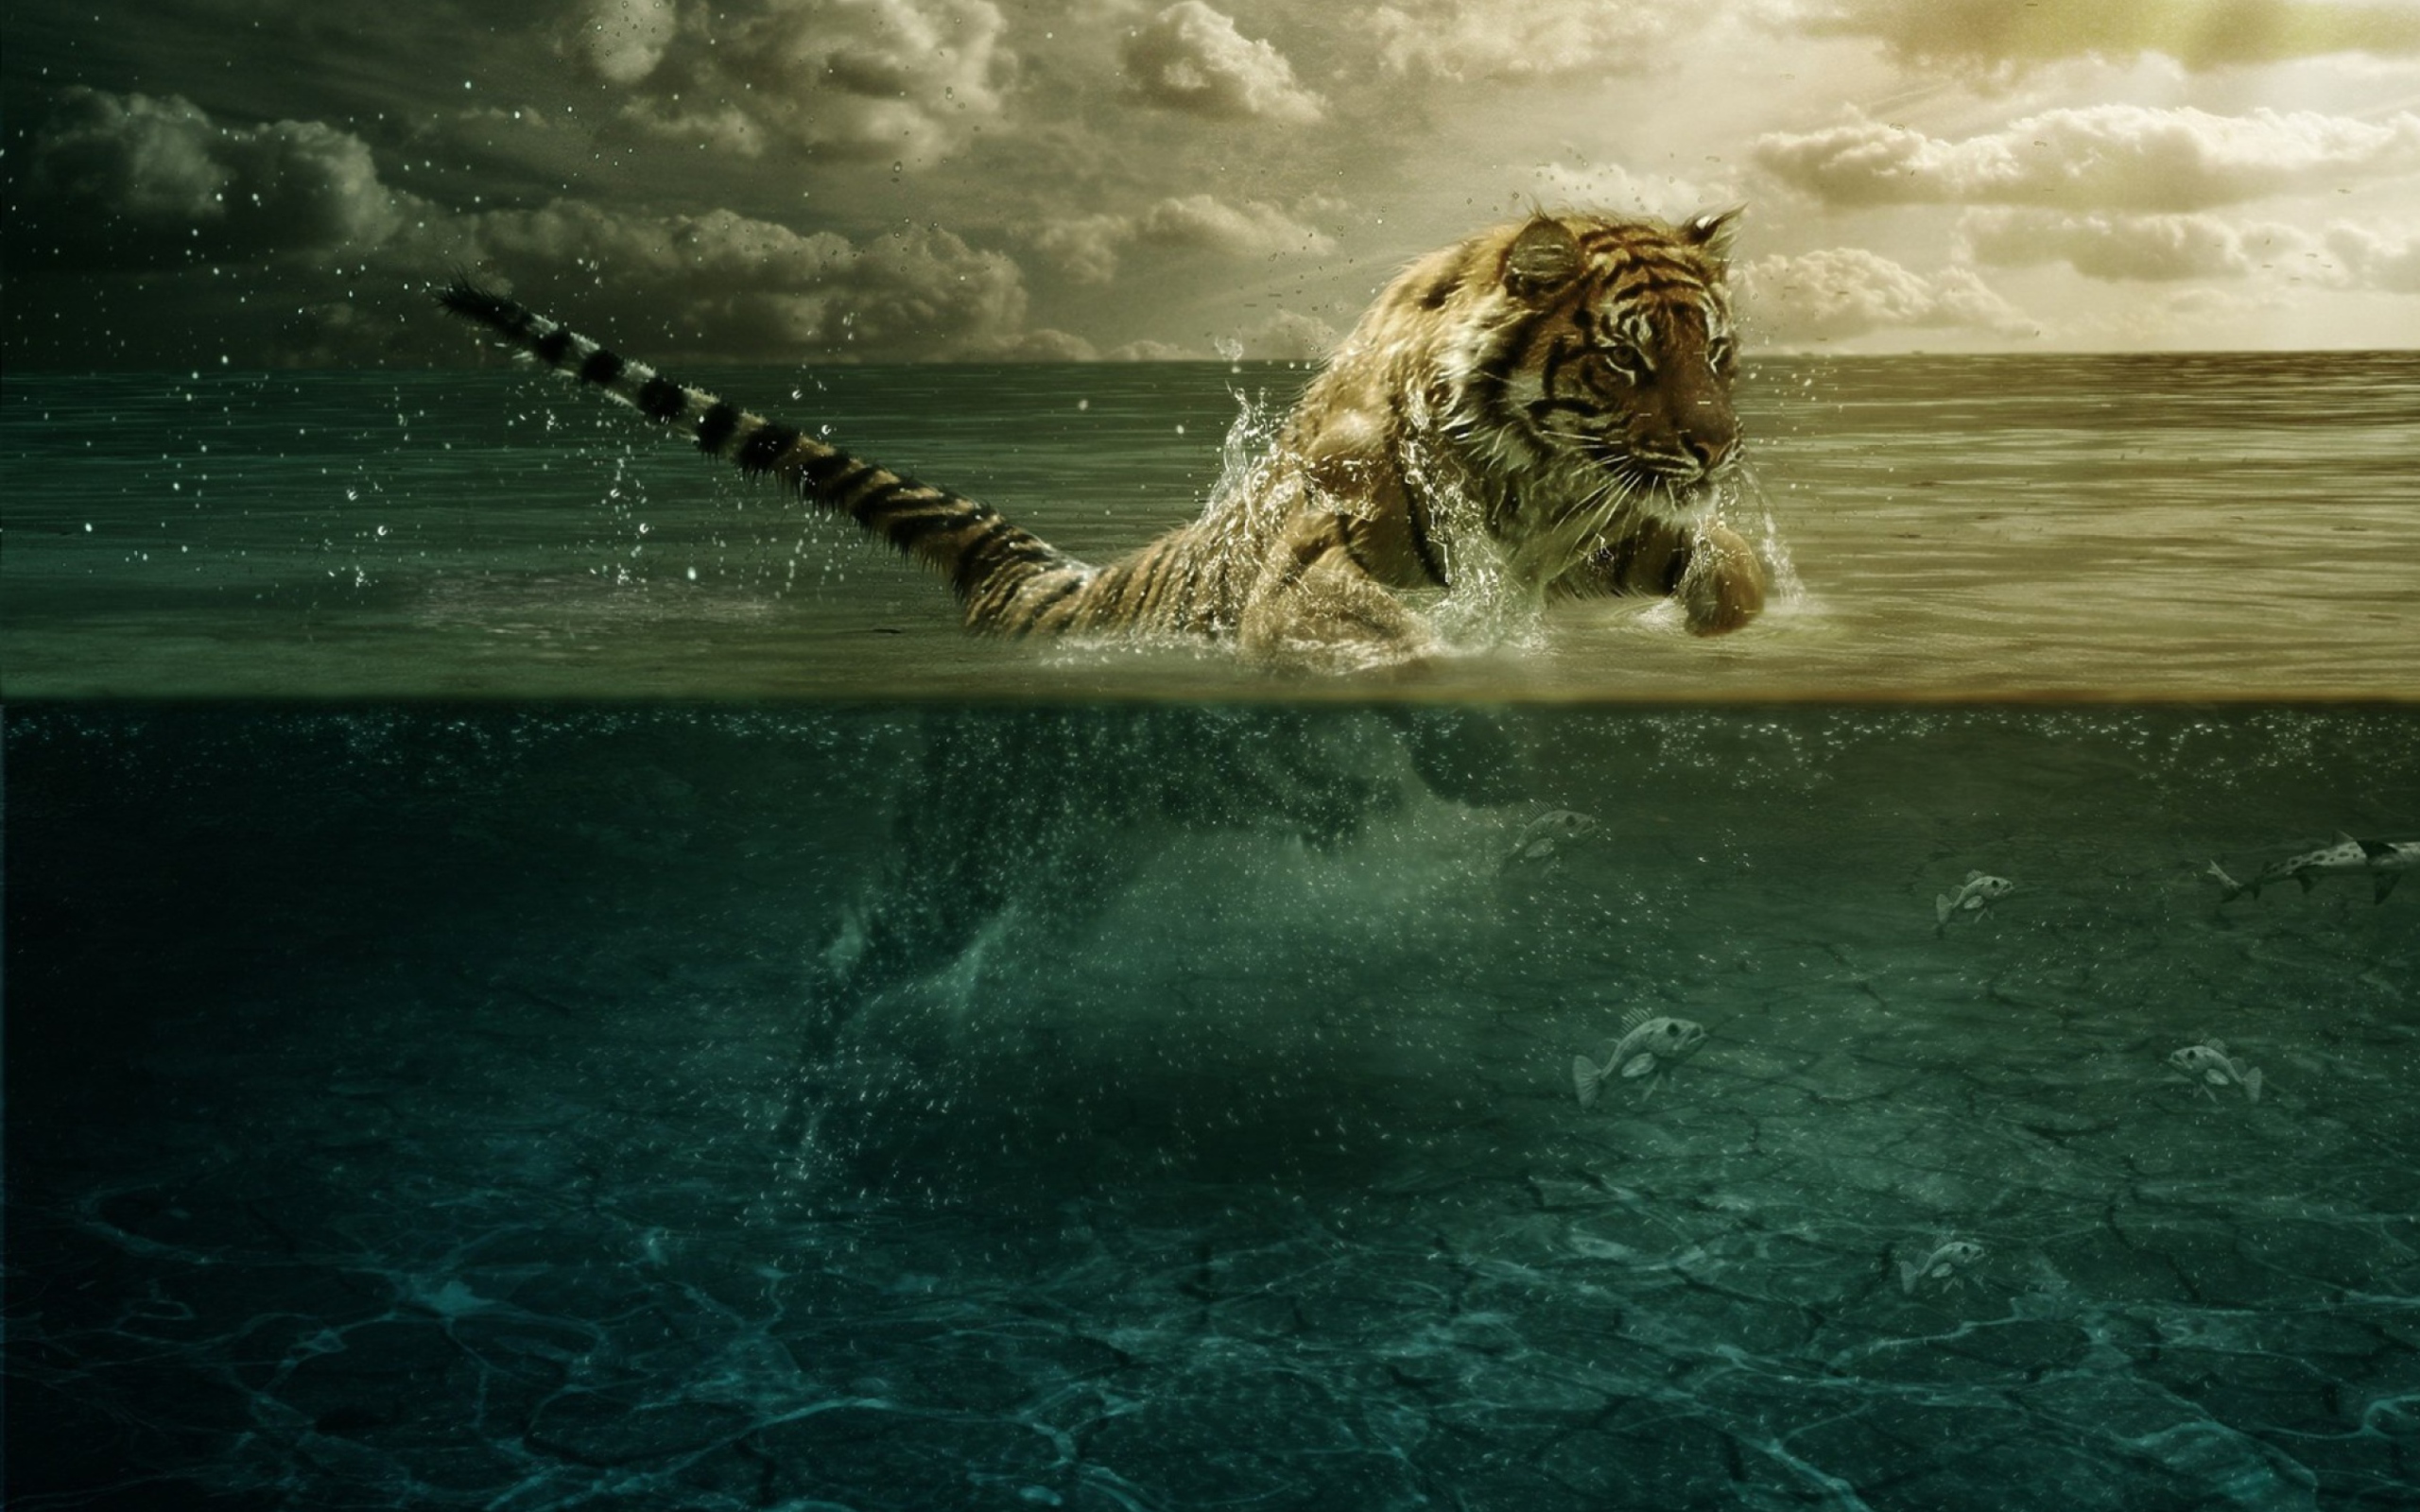 Tiger Jumping In Water wallpaper 2560x1600